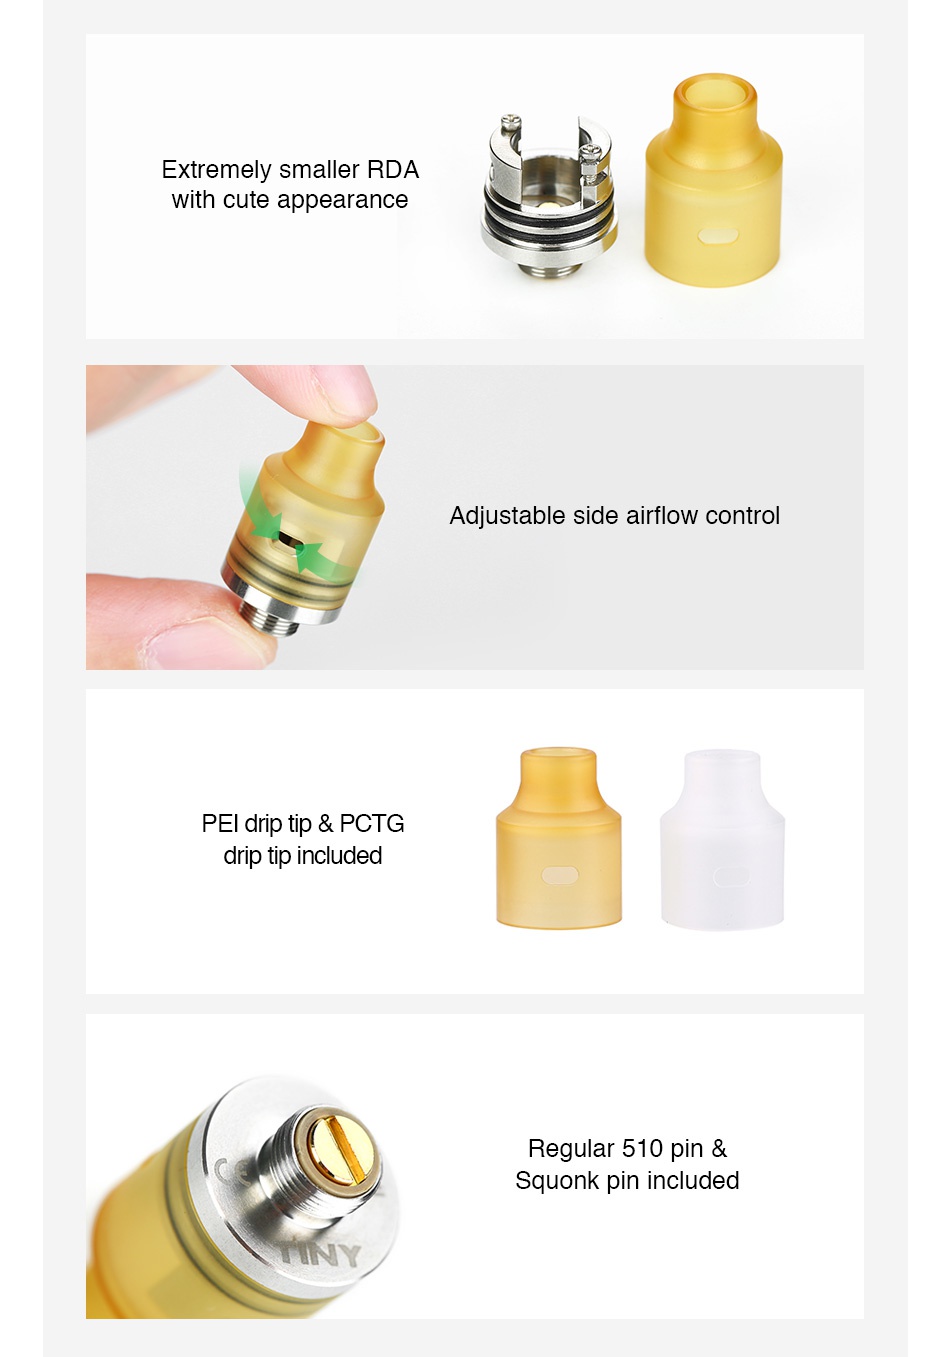 Demon Killer Tiny RDA Extremely smaller RDA with cute appearance Adjustable side airflow control PEl drip tip pctg drip tip included Regular 510 pin Squonk pin included